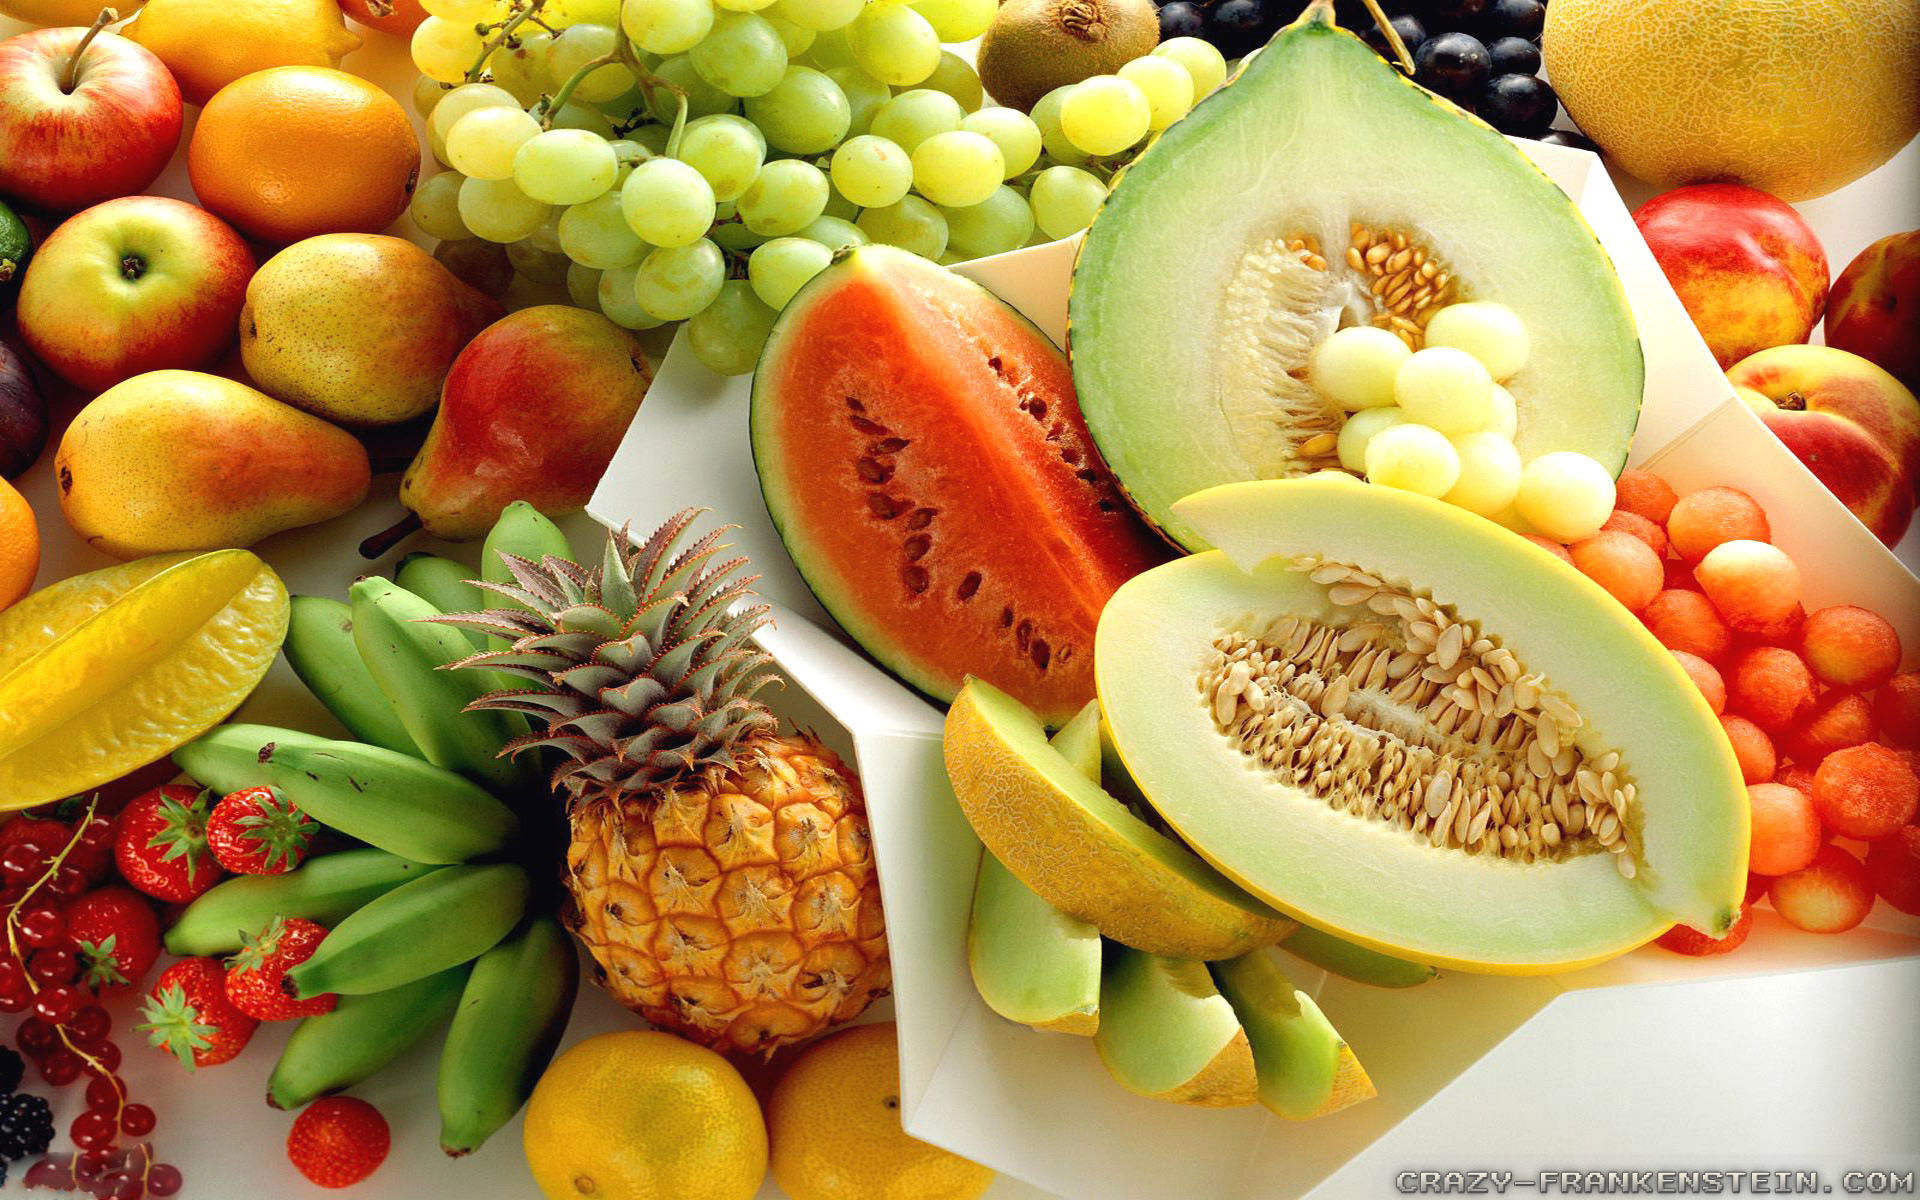 1920x1200 Fruit Images Wallpapers (38 Wallpapers)